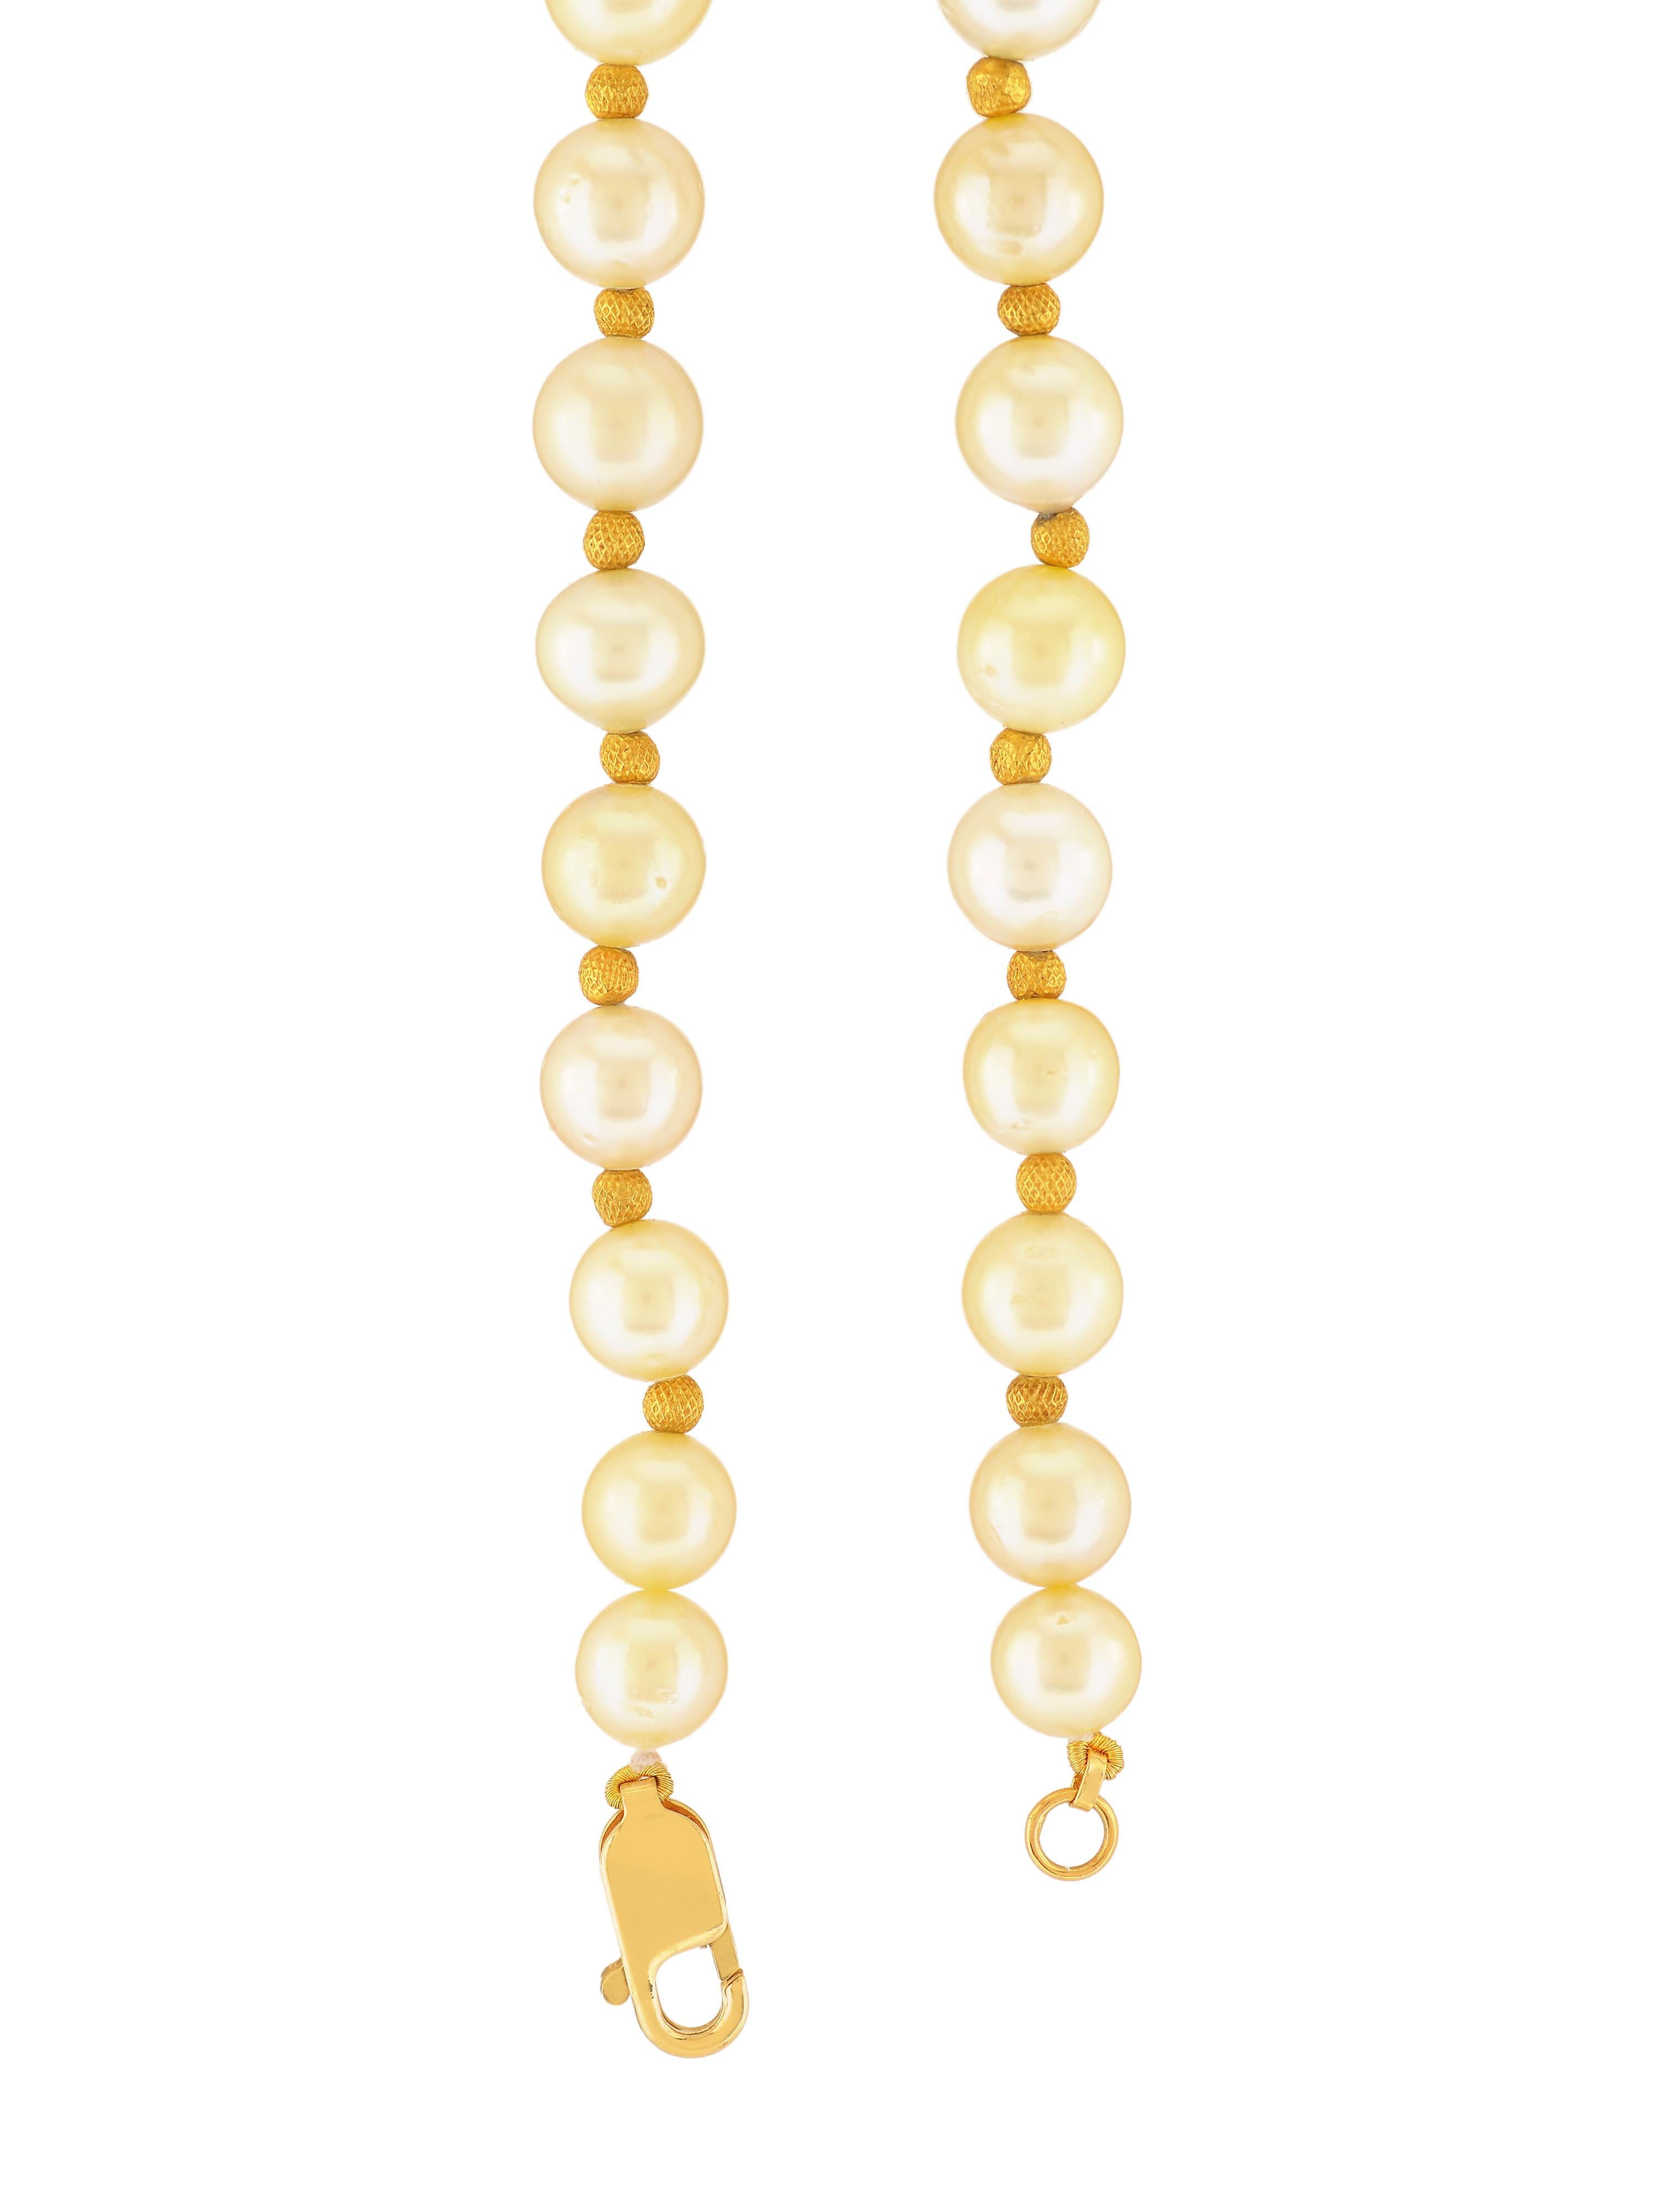 Bead Pearl Necklace with 3 Diamond and Enamel Pendants in 18k Gold For Sale